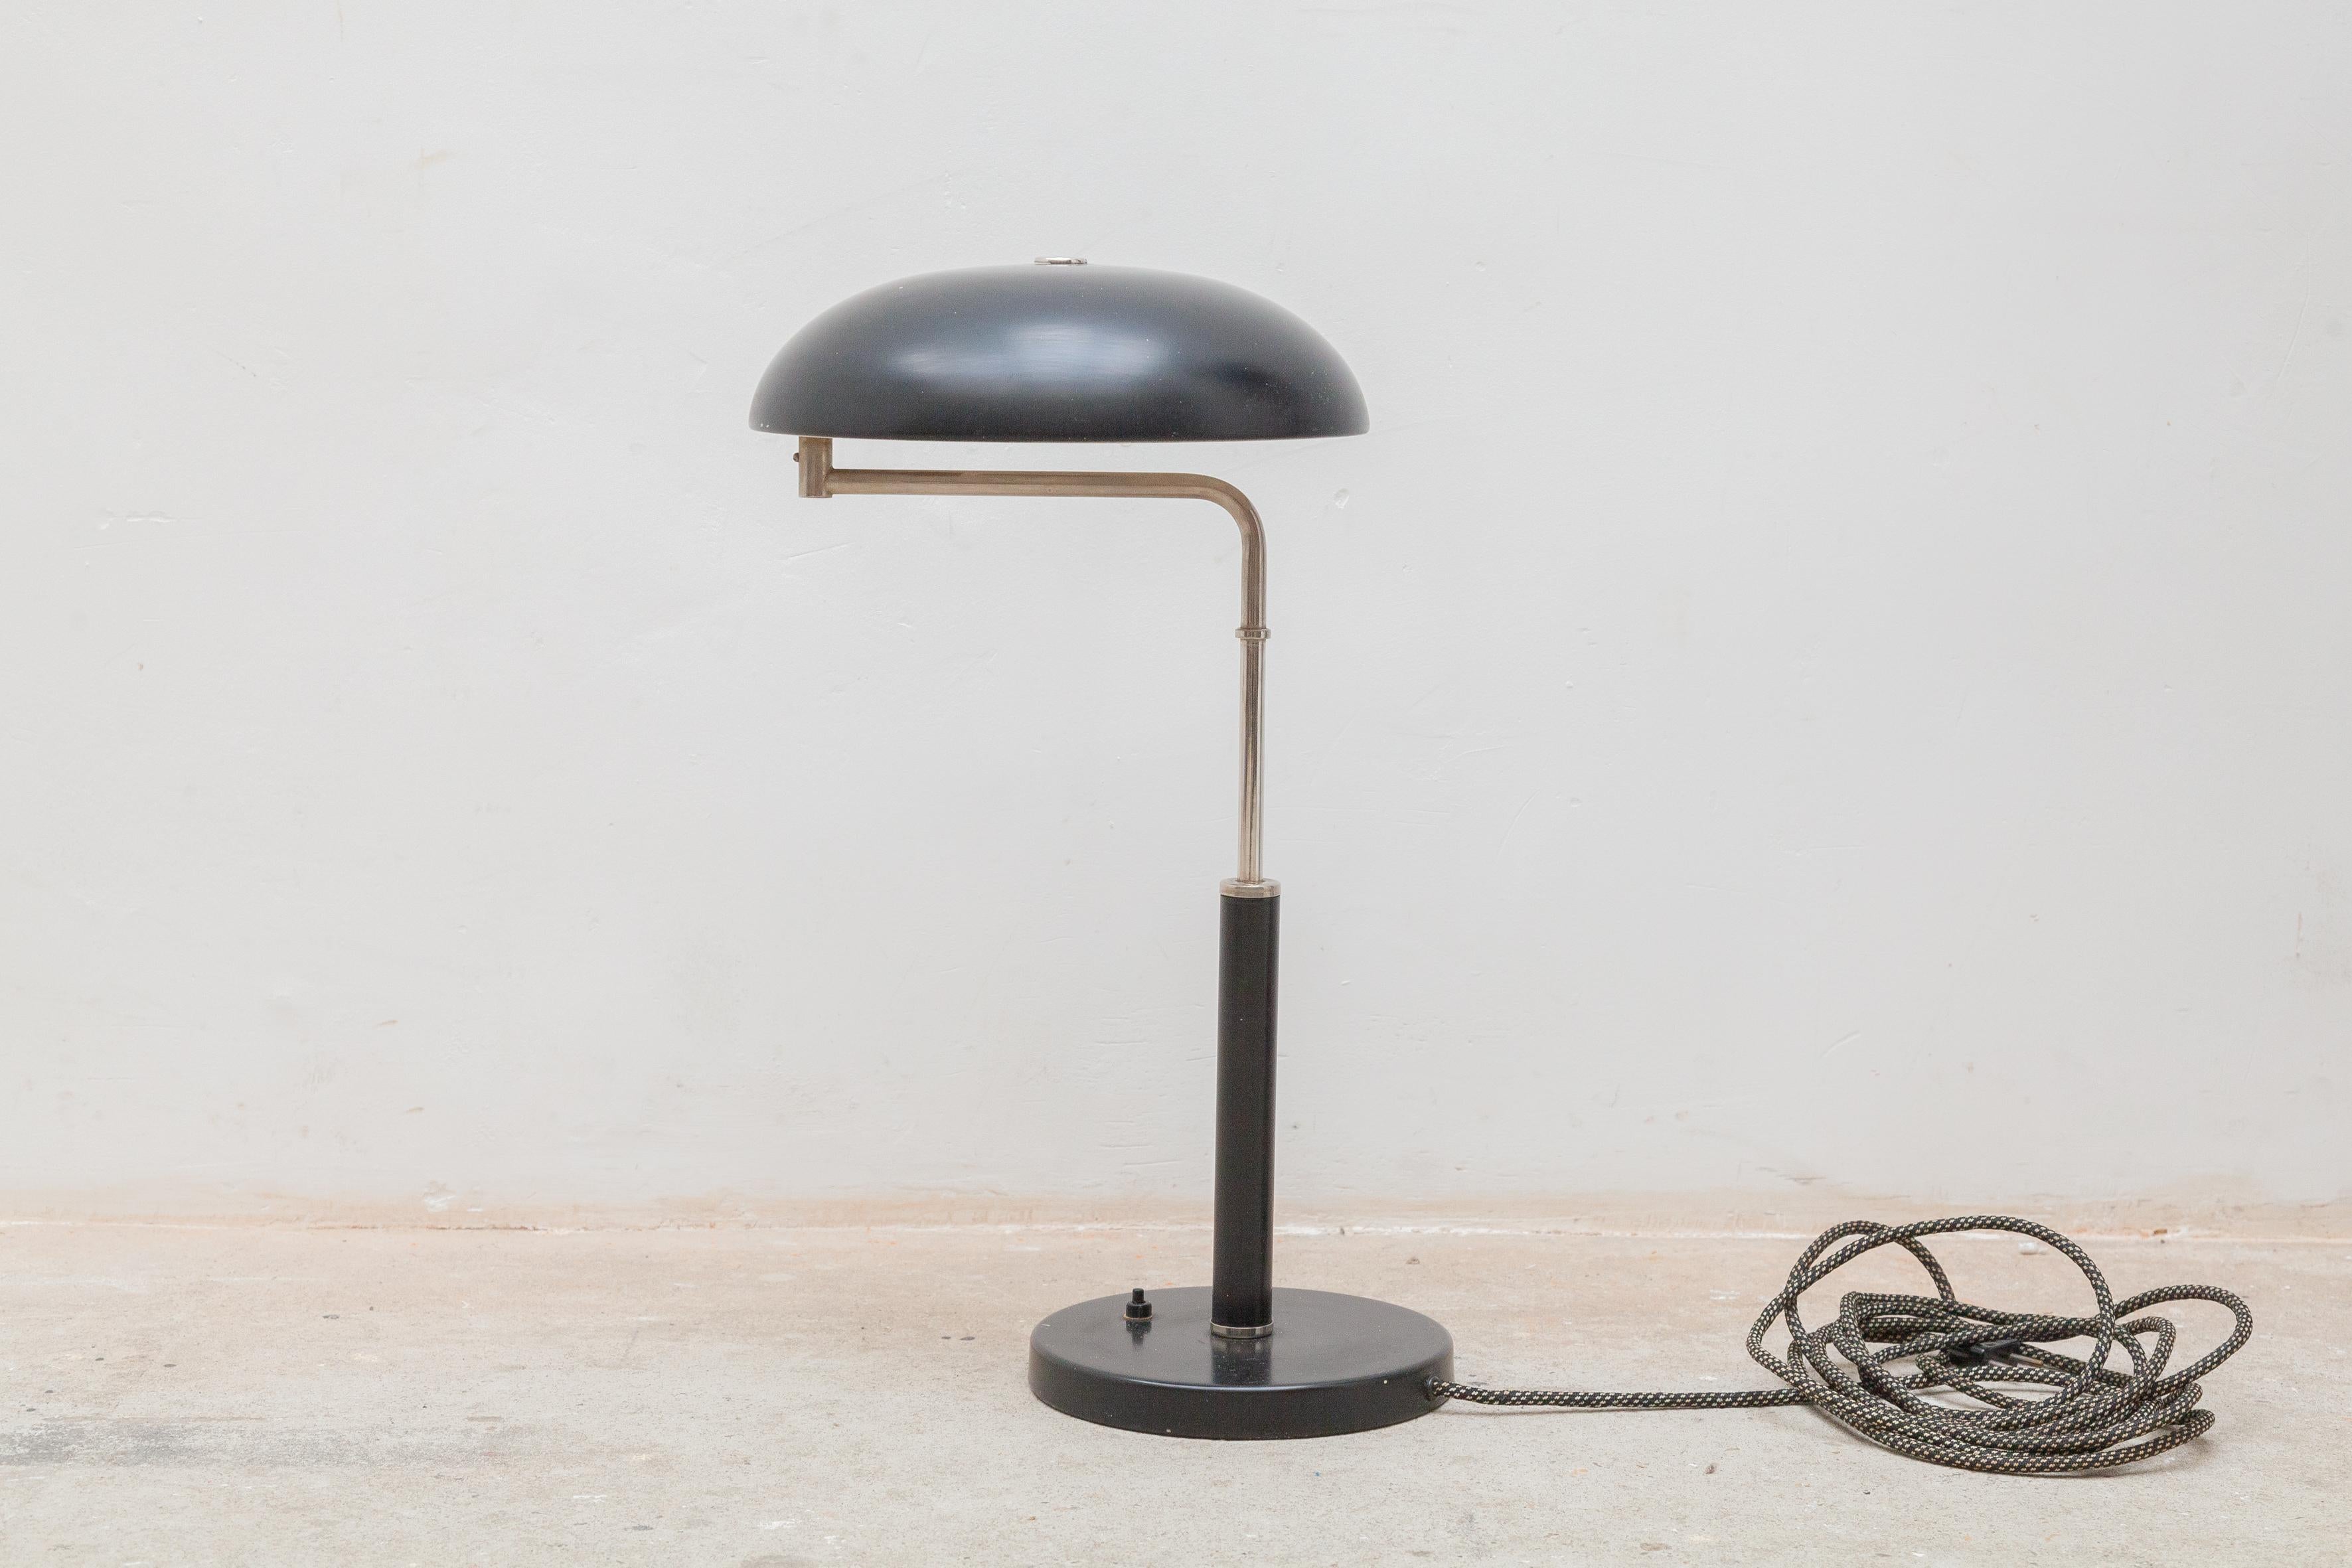 Stylish Bauhaus design-classic desk/table adjustable lamp. This design classic table lamp has a beautifully shaped, blackened shade with matching, circular base. Multiple adjustability options: the arm swivels, as does the shade, and the arm height